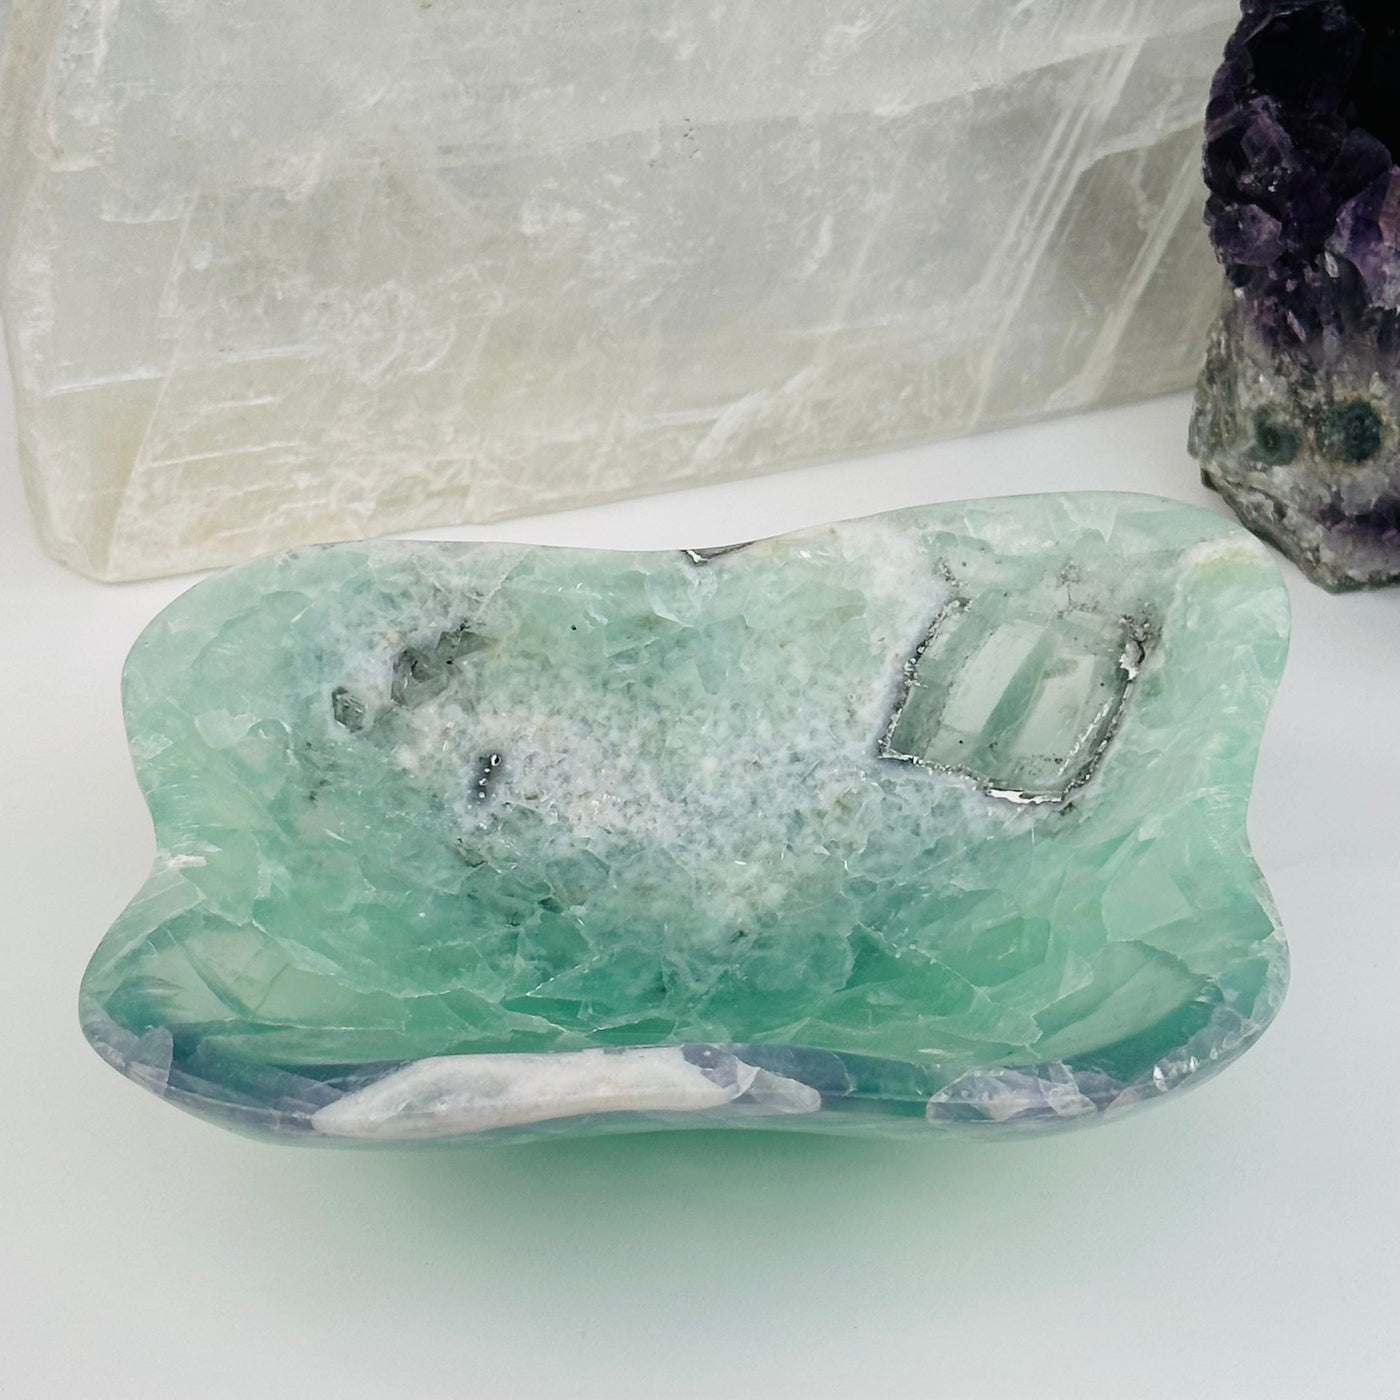 Fluorite Polished Bowl from Mexico displayed as home decor 